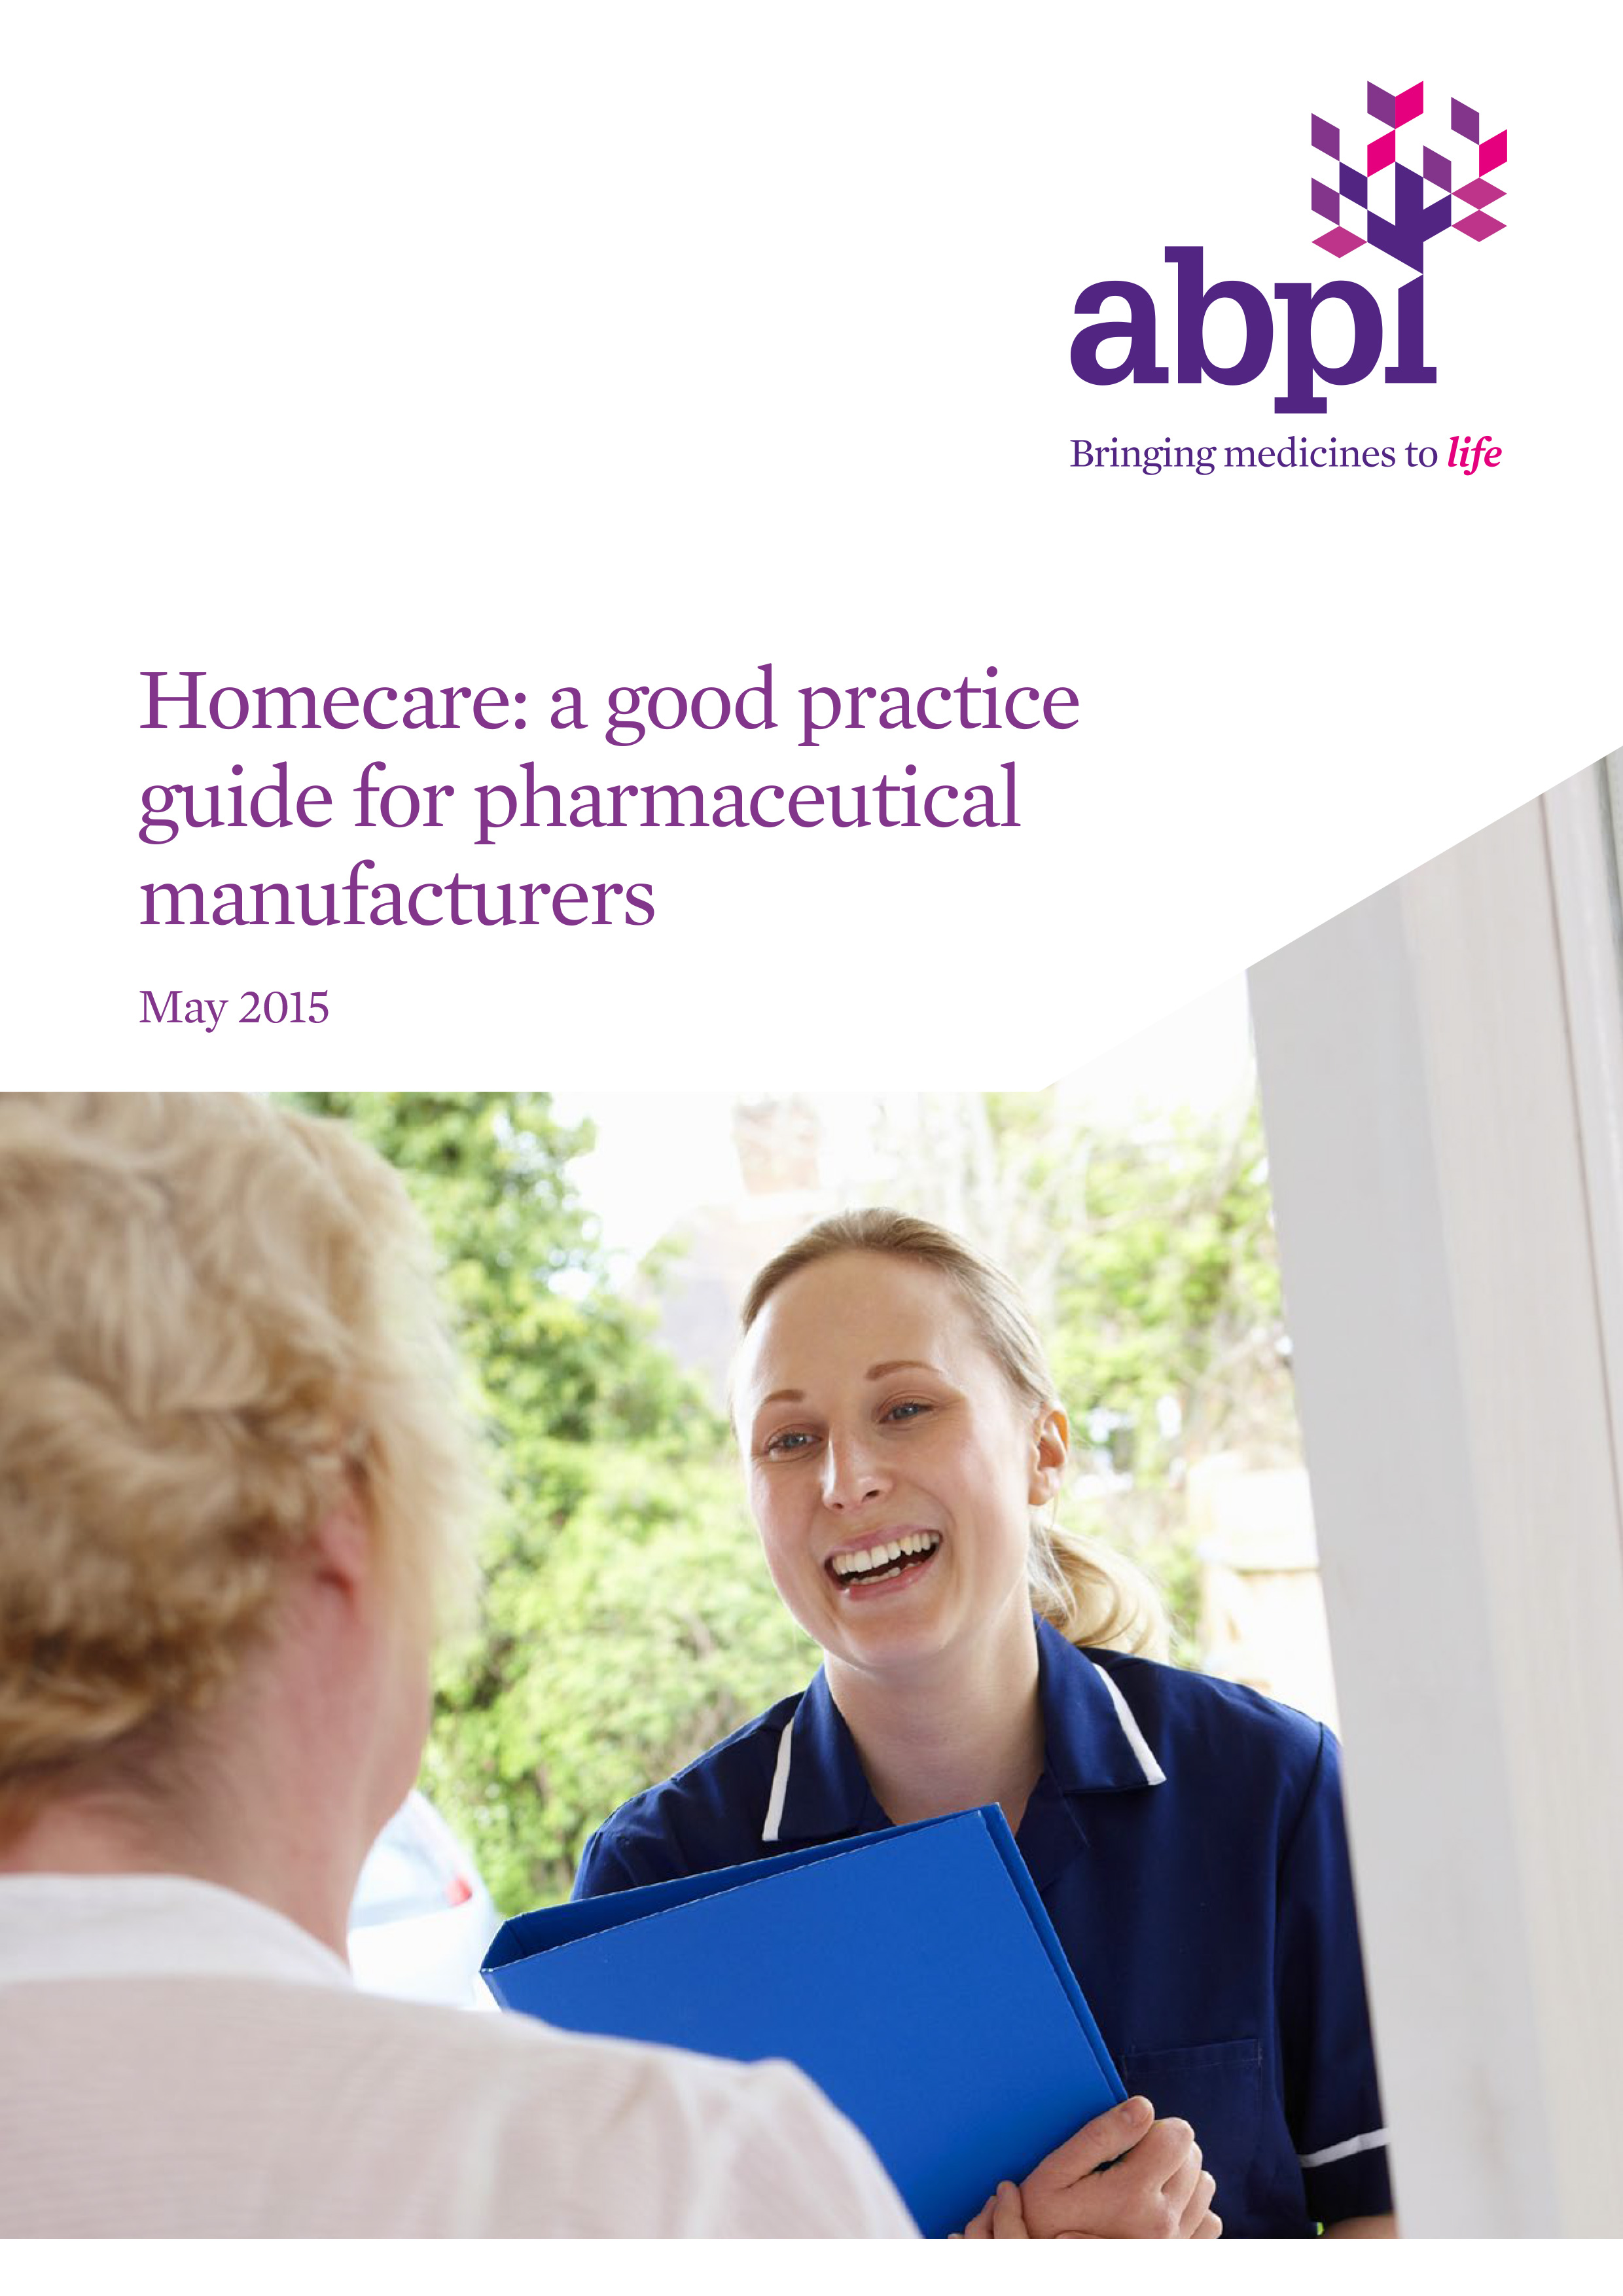 Homecare - a good practice guide for pharmaceutical manufacturers